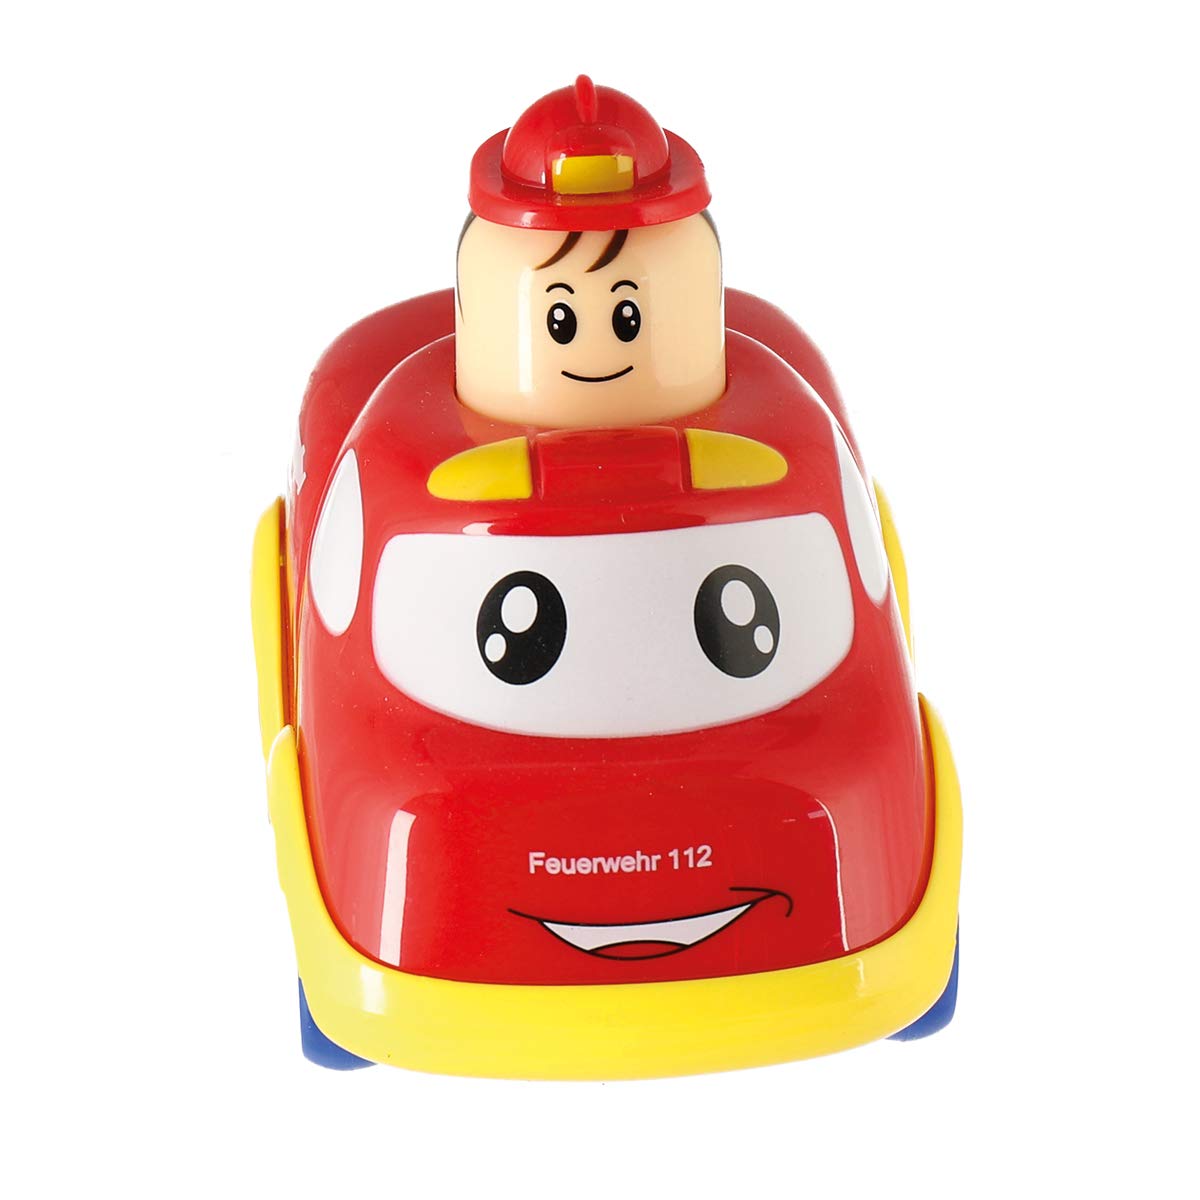 Bieco Push & Go Cars Toy Car with Wind Up Mechanism Push Down Head Toy Vehicle Crawling Fire Brigade red